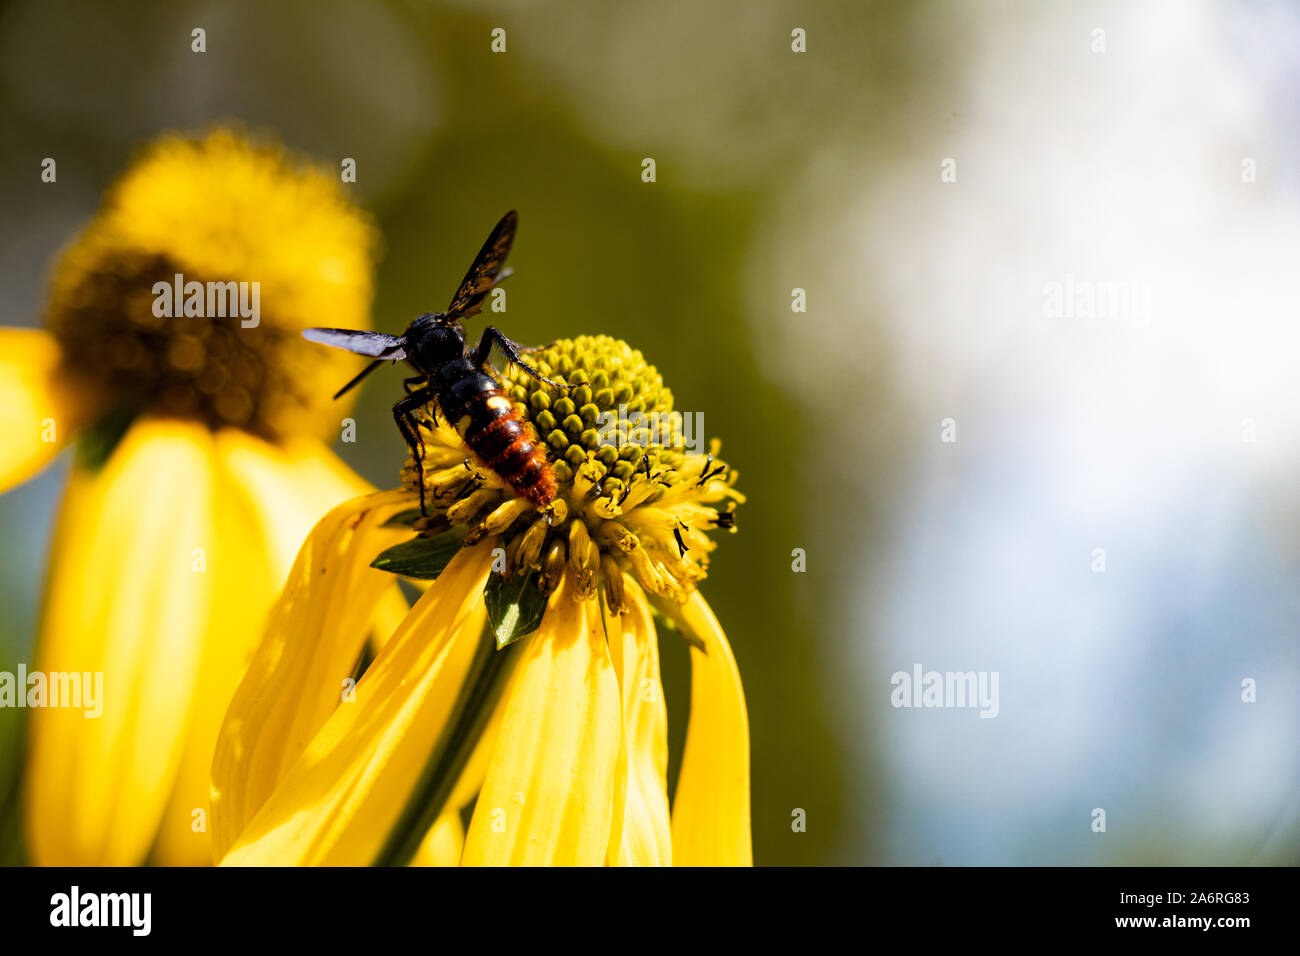 Insect on droopy Yellow Flower with Blurred Background Stock Photo